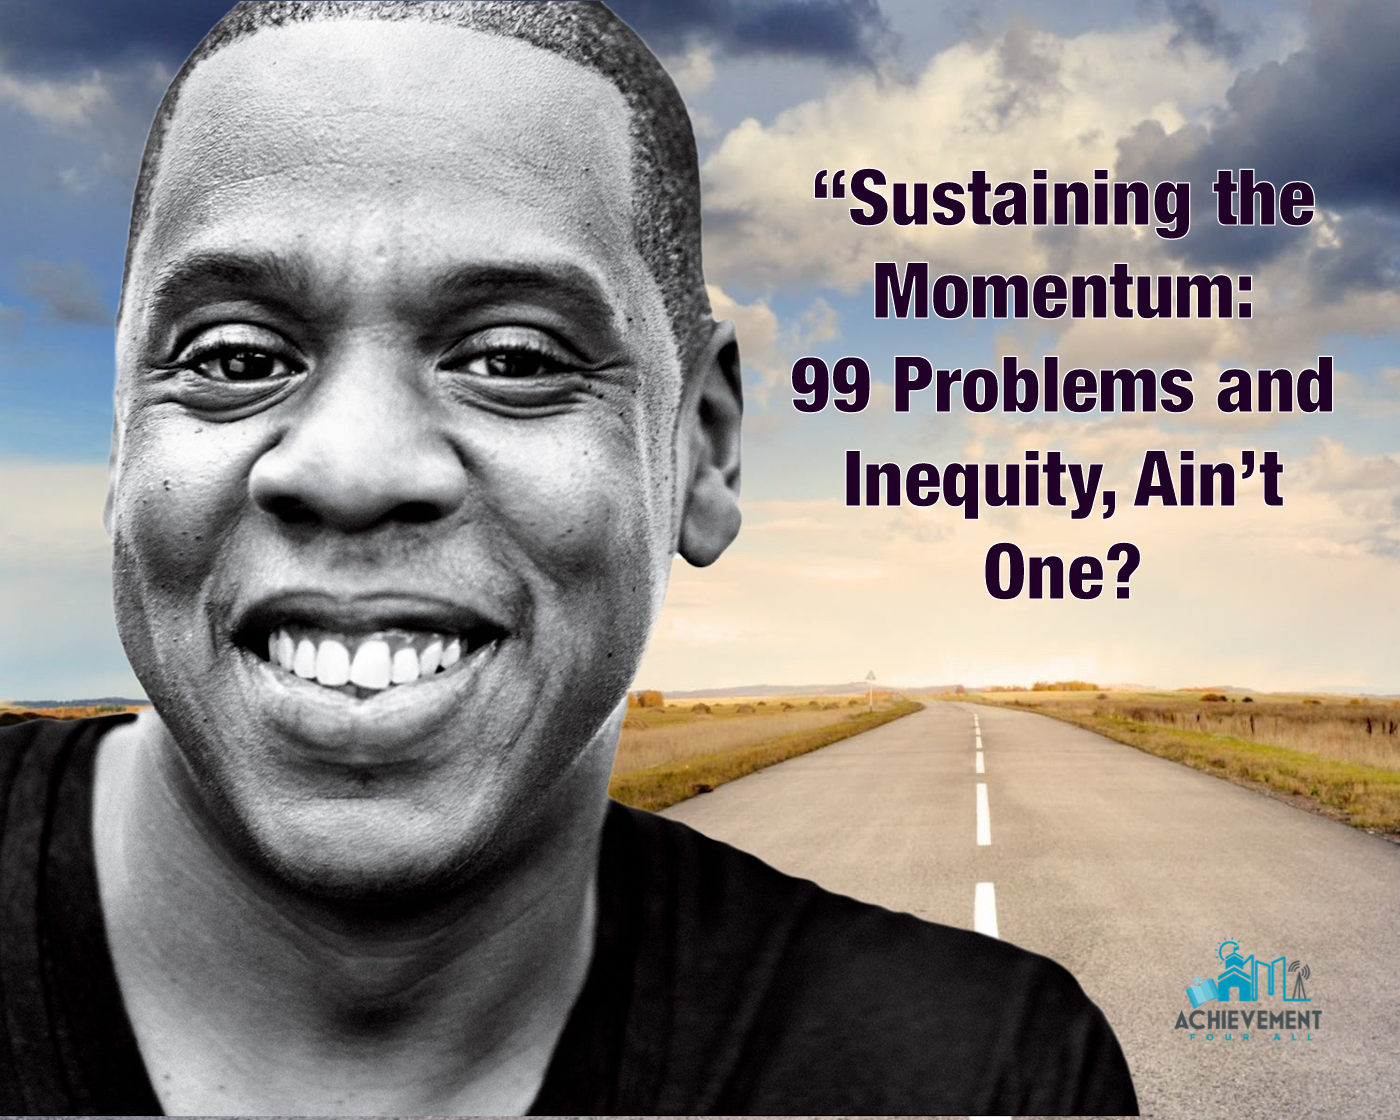 “Sustaining the Momentum: 99 Problems and Inequity, Ain’t One”